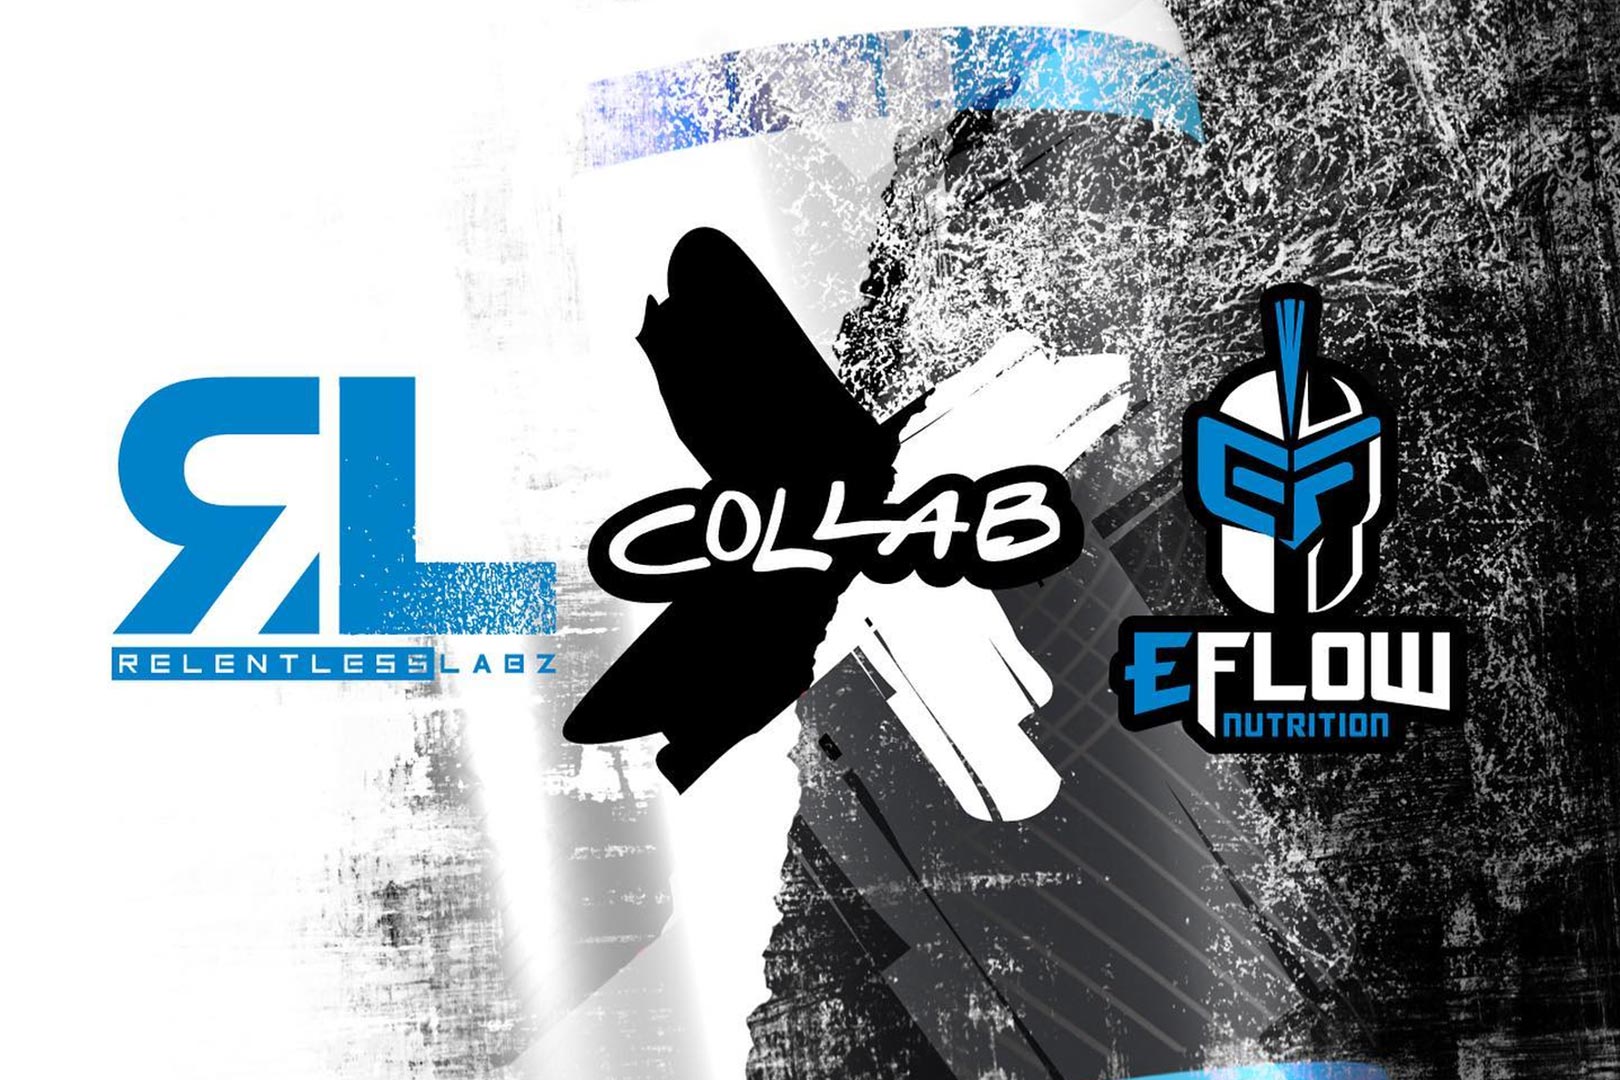 Eflow Nutrition And Relentless Labz Collaboration